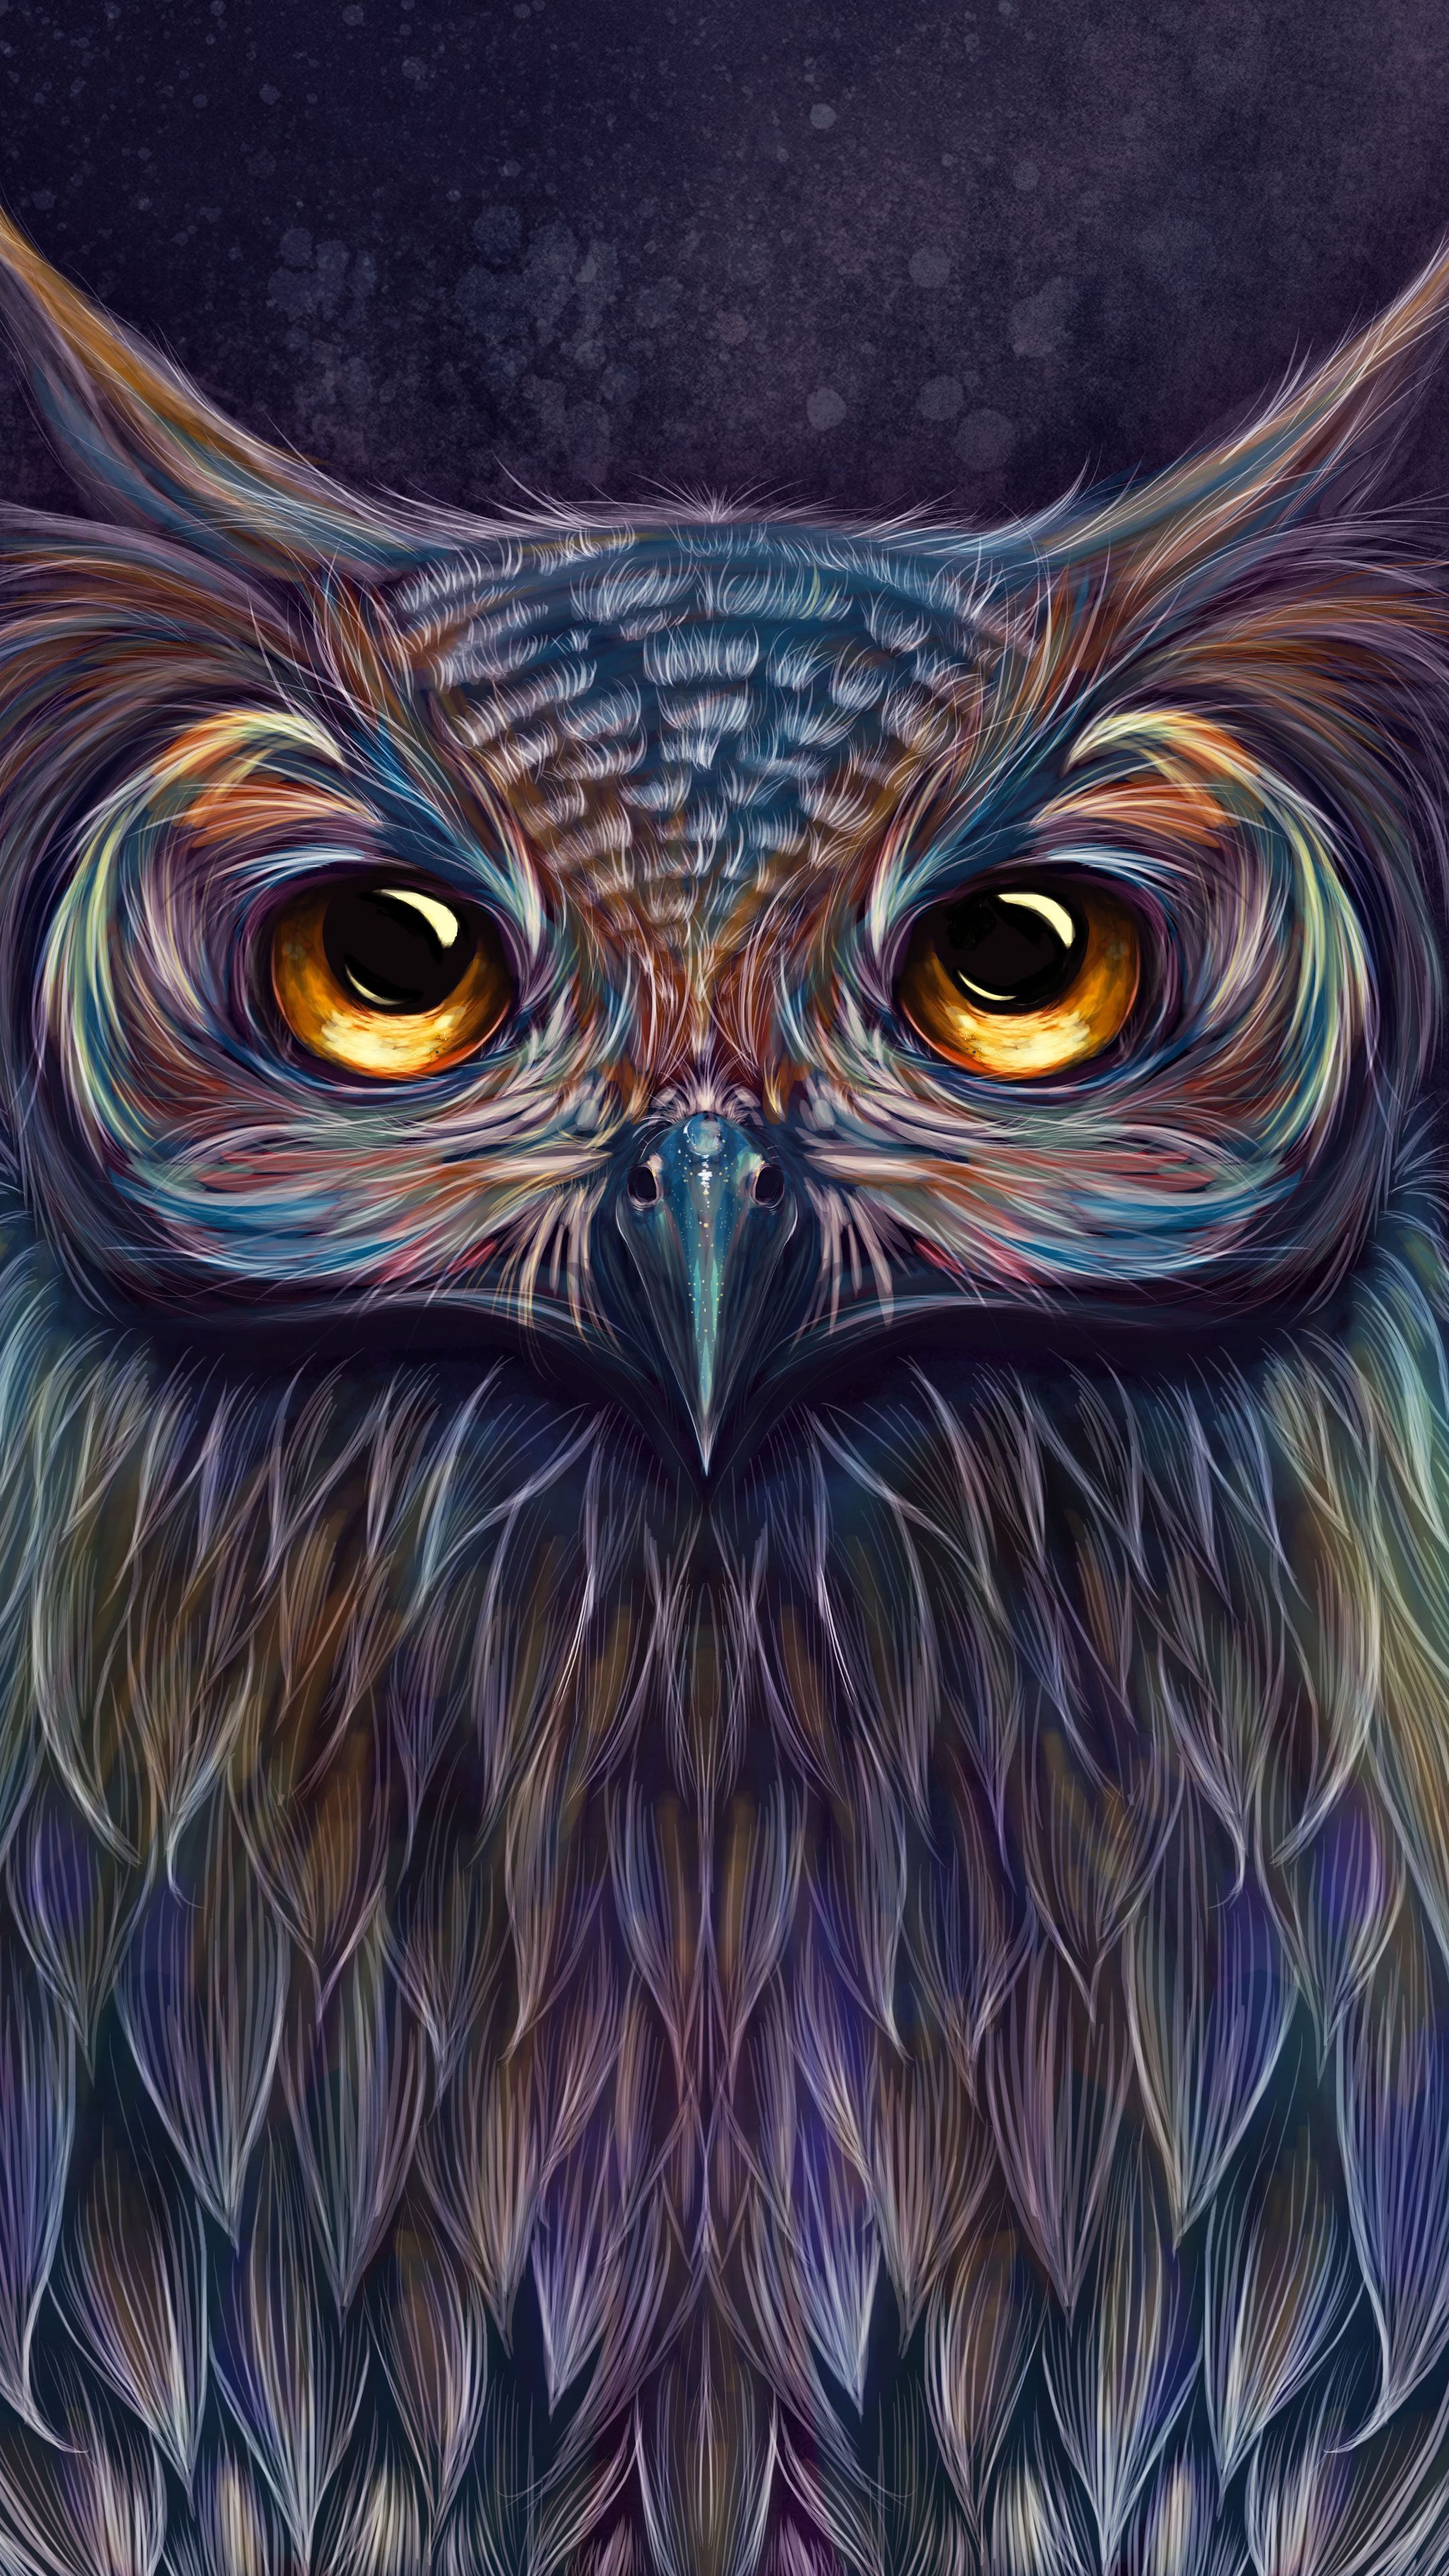 Colorful Owl Wallpaper, HD Colorful Owl Background on WallpaperBat